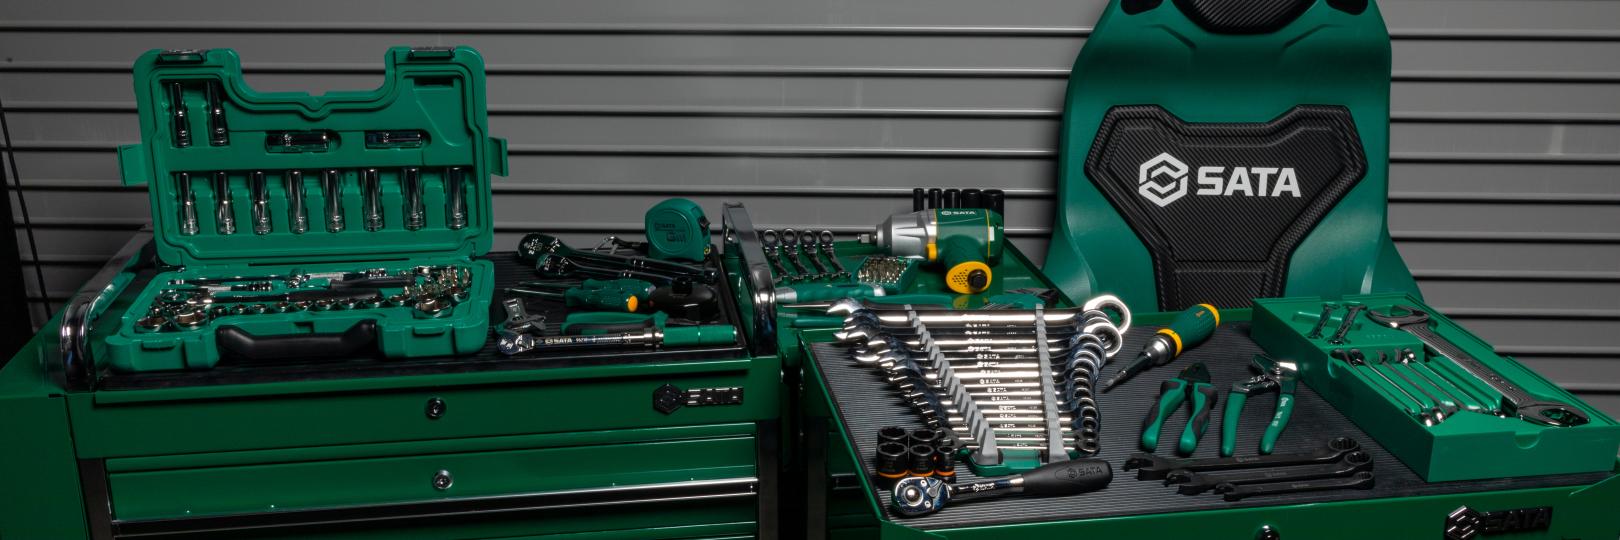 SATA Tools stacked on Tool Trolley